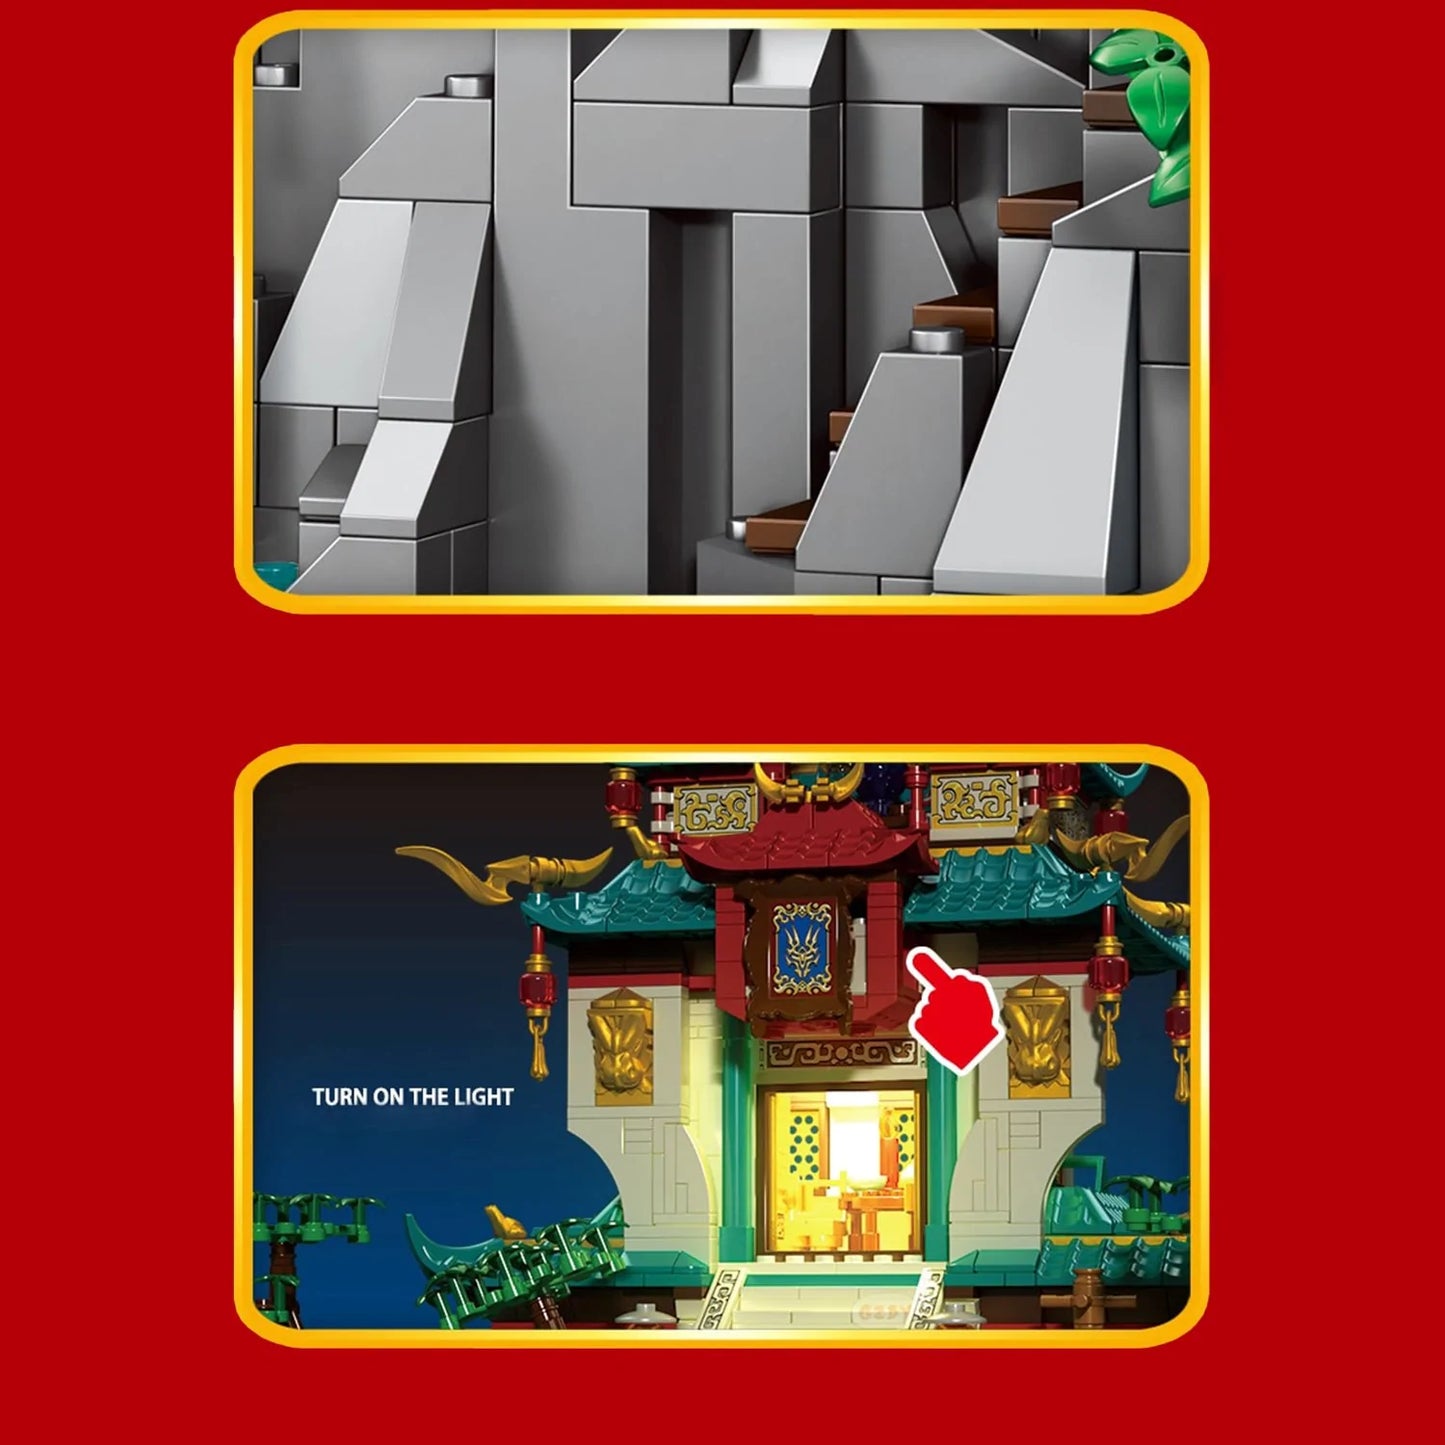 Build And Customize Your Own Dragon Palace With Our Building Set